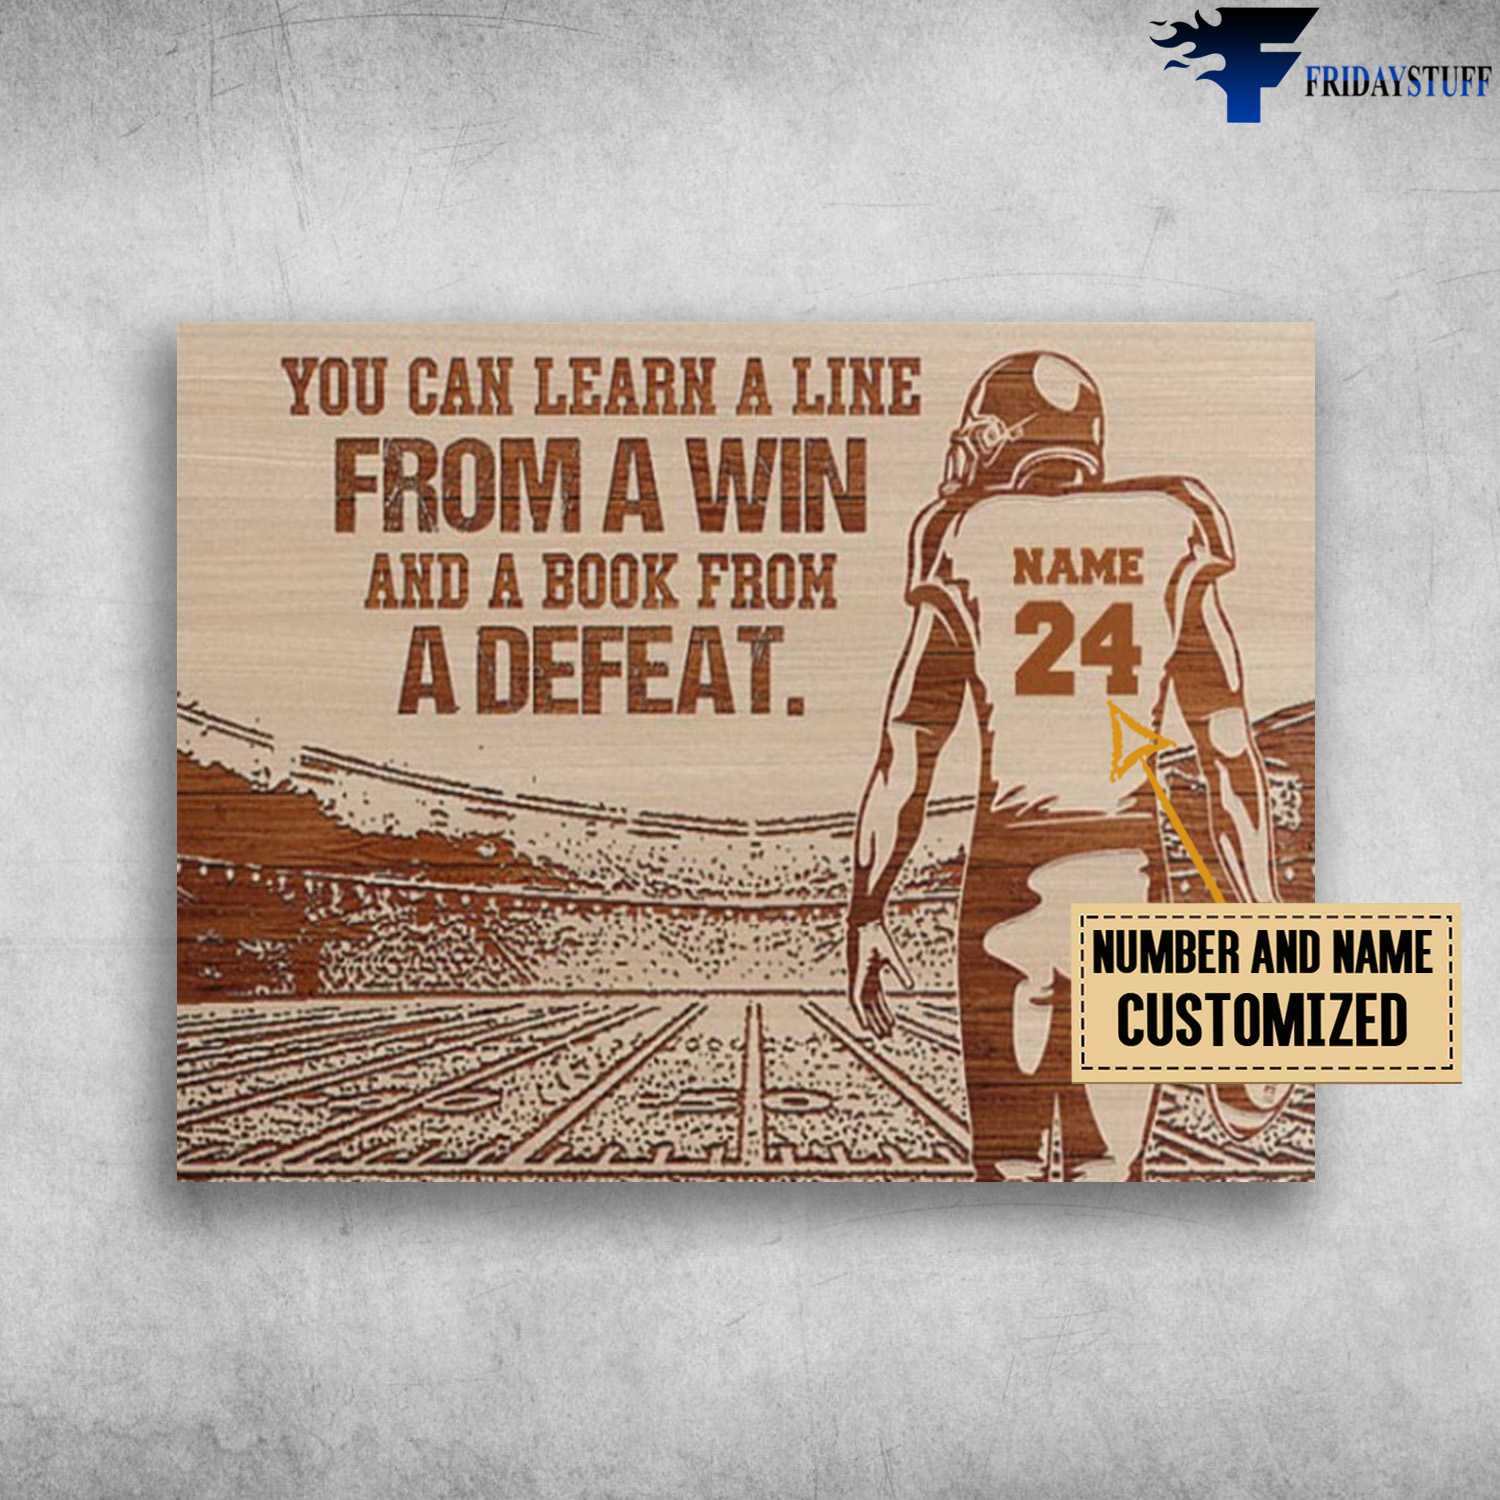 Football Poster, Football Player, You Can Learn A Line, From A Win, And A Book From A Defeat